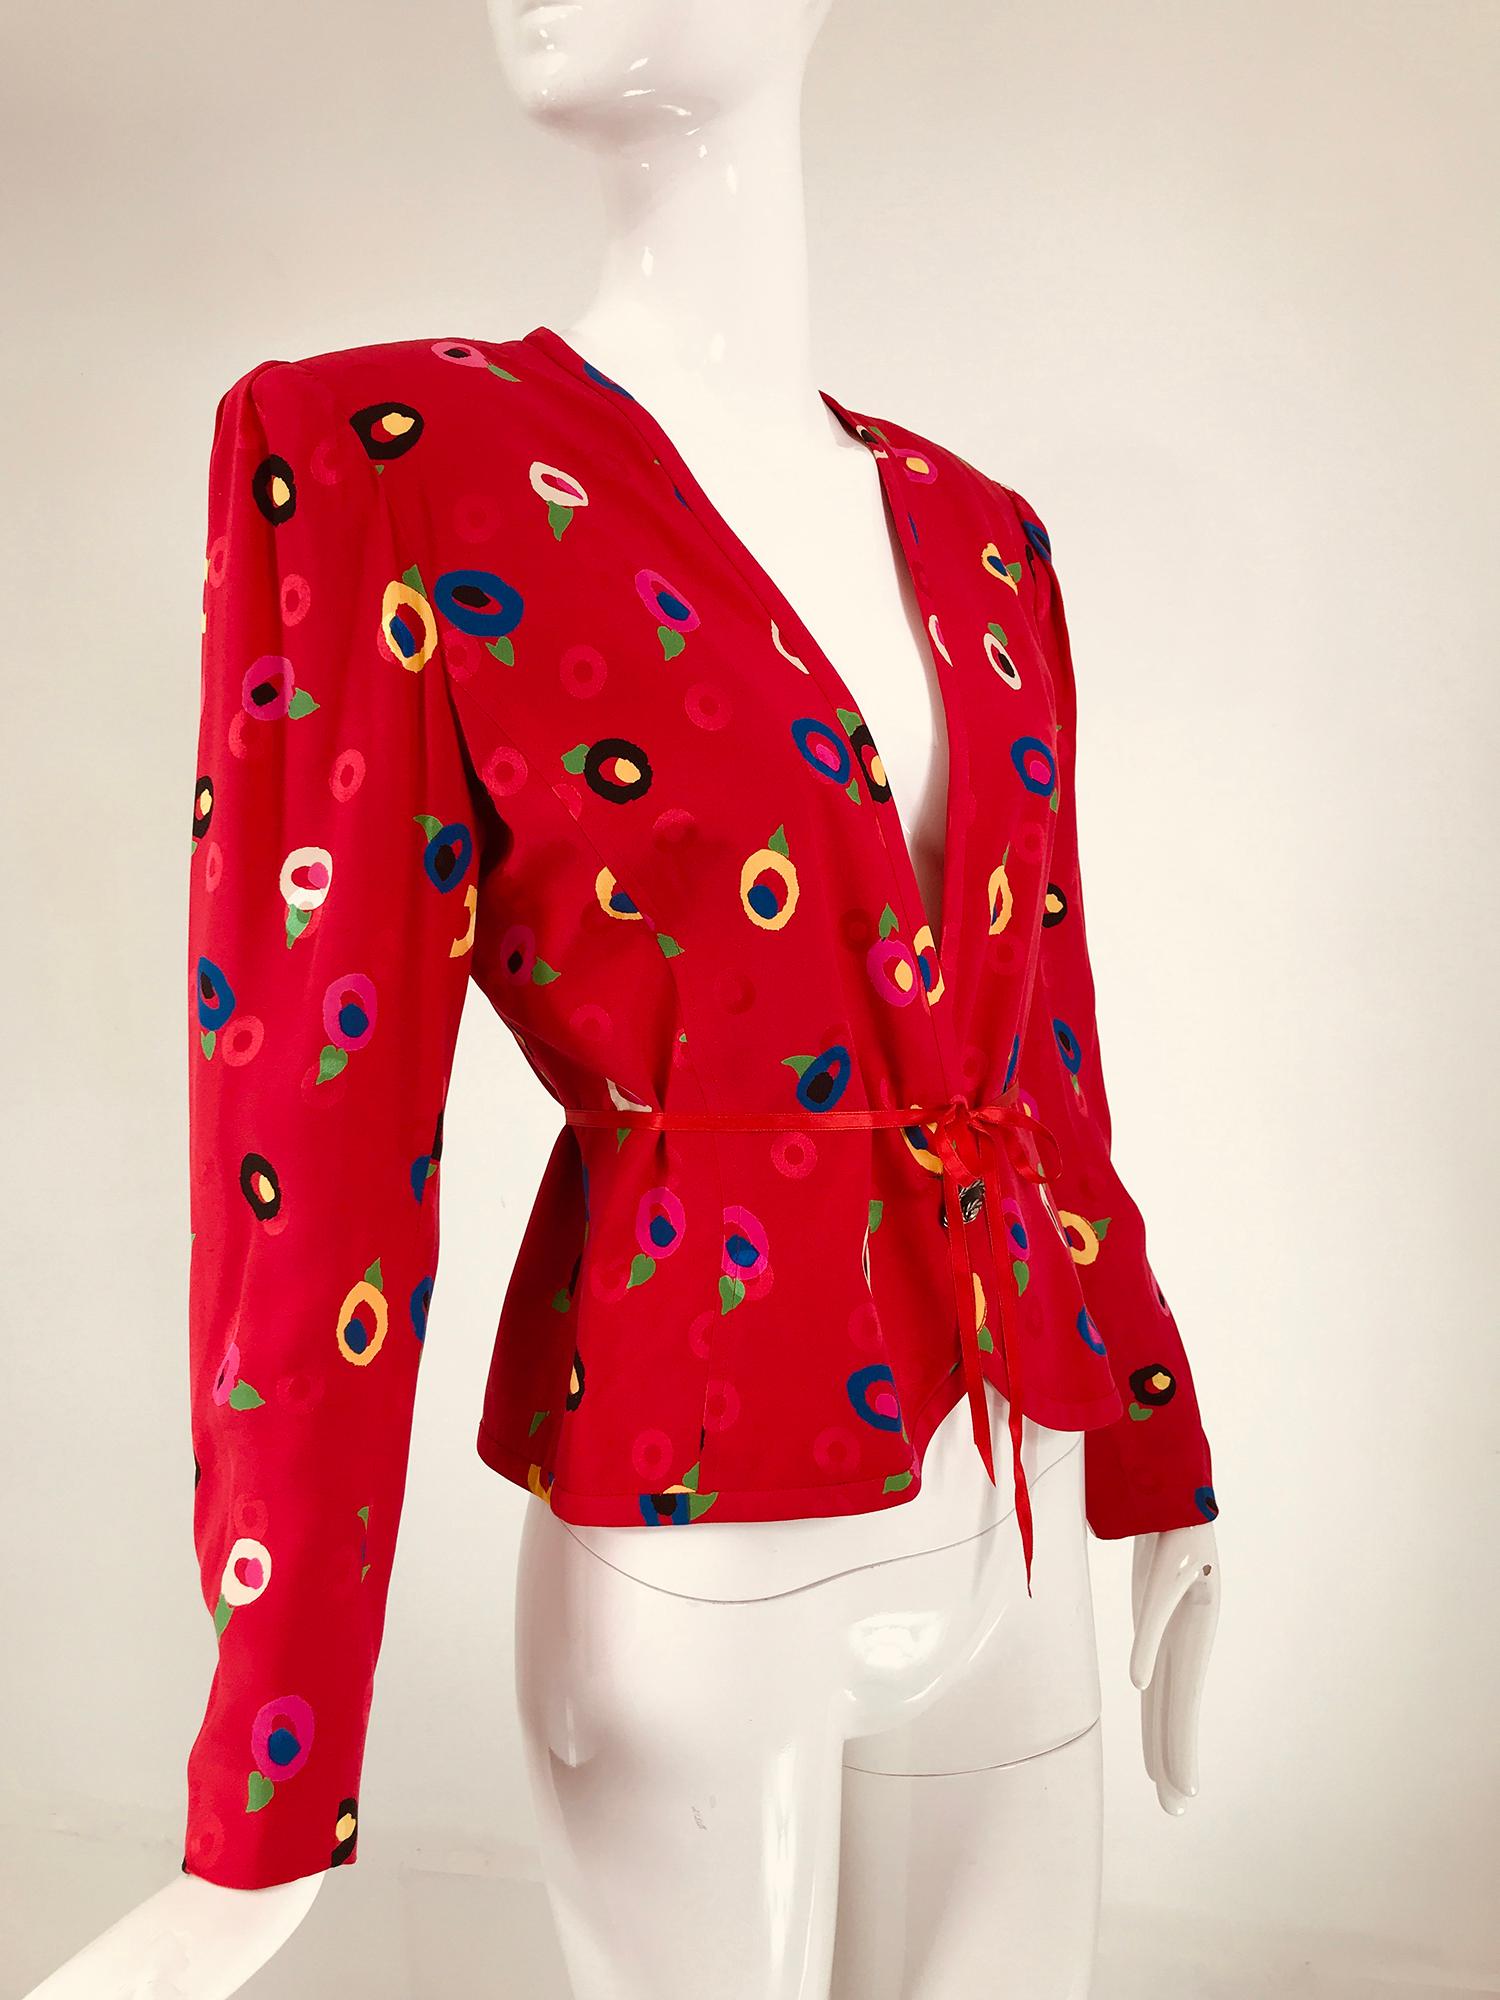 Ungaro Red Printed Silk Jacquard V Neck Button Front Jacket 1980s For Sale 9